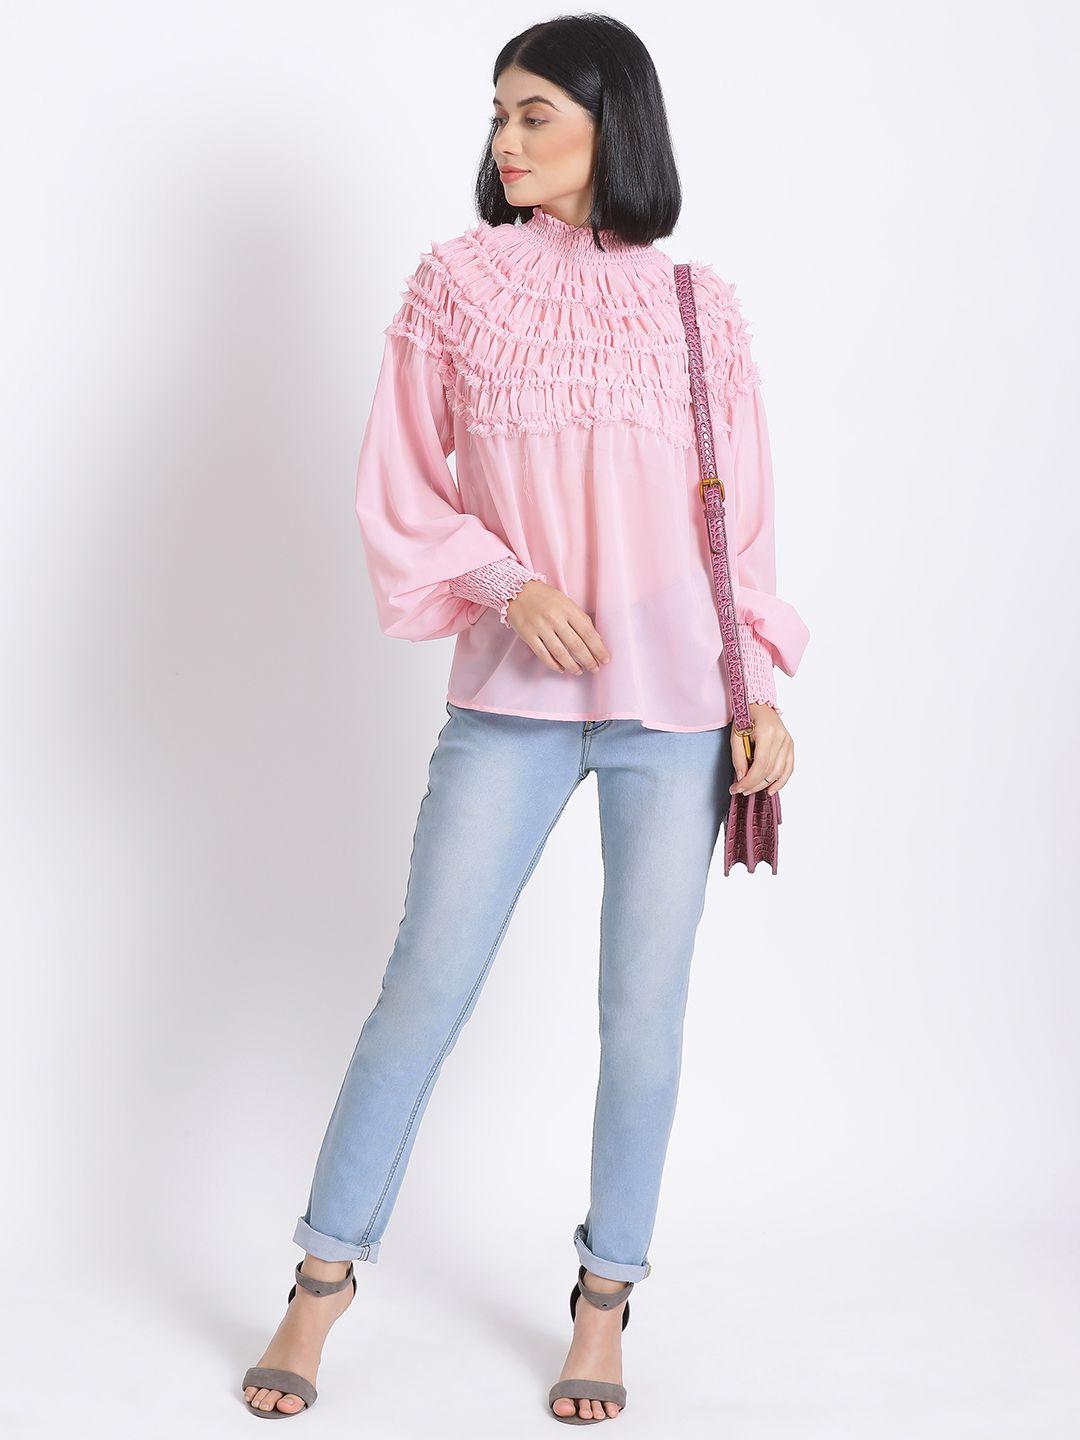 oxolloxo pink puff sleeves a-line smocked top